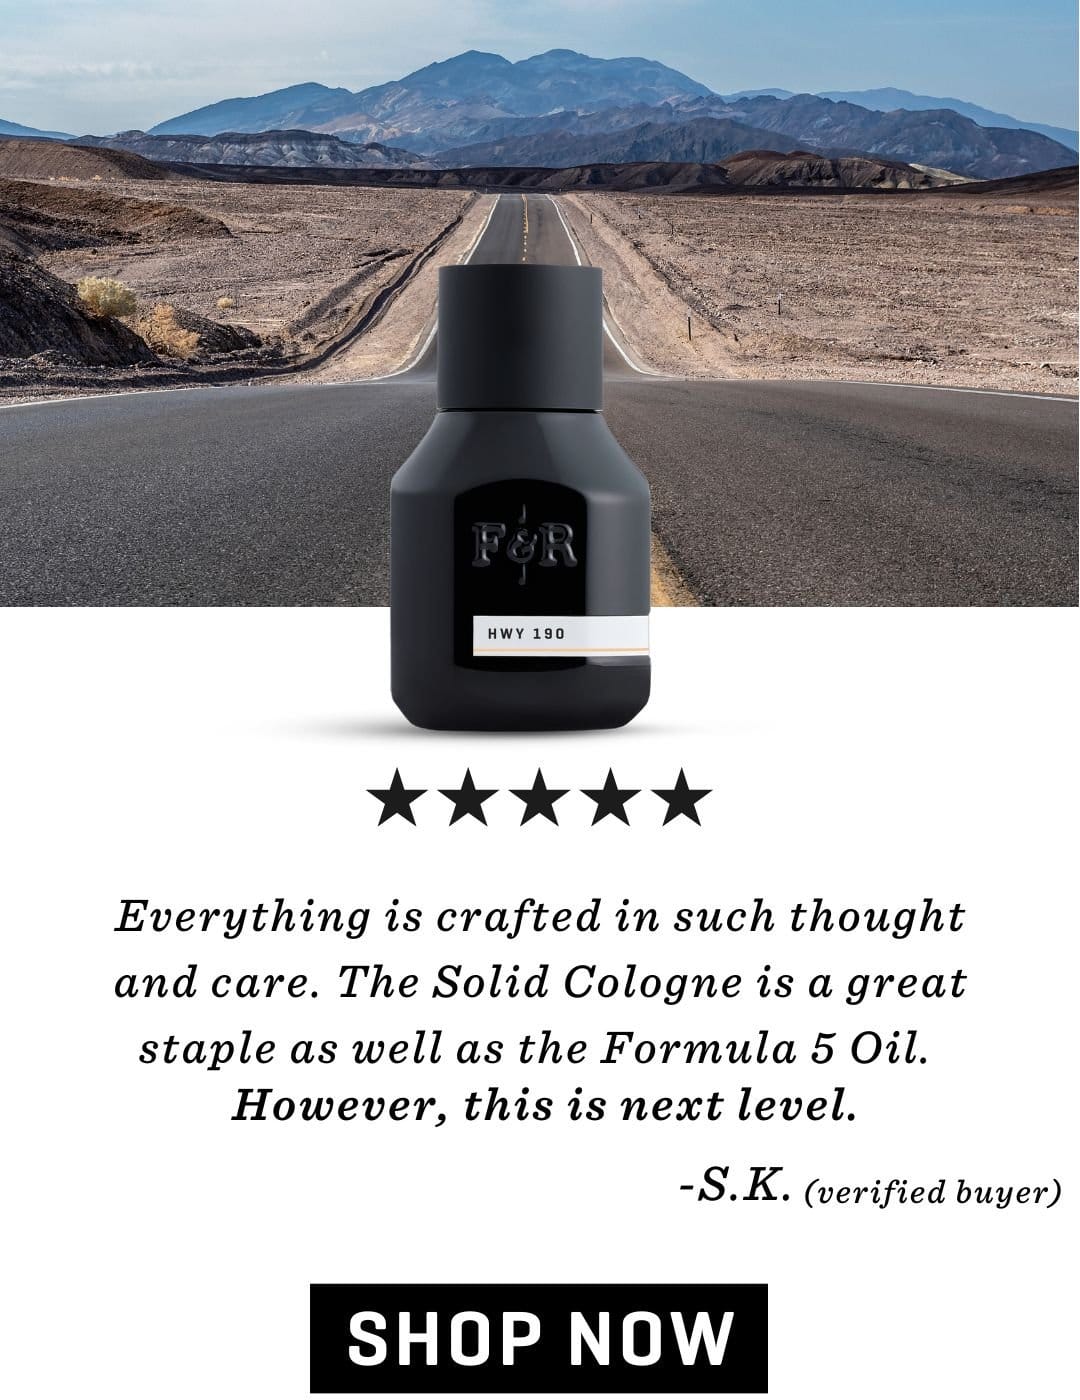 Image of HWY 190 Fragrance with text that reads, "There's nothing quite like HWY 190."